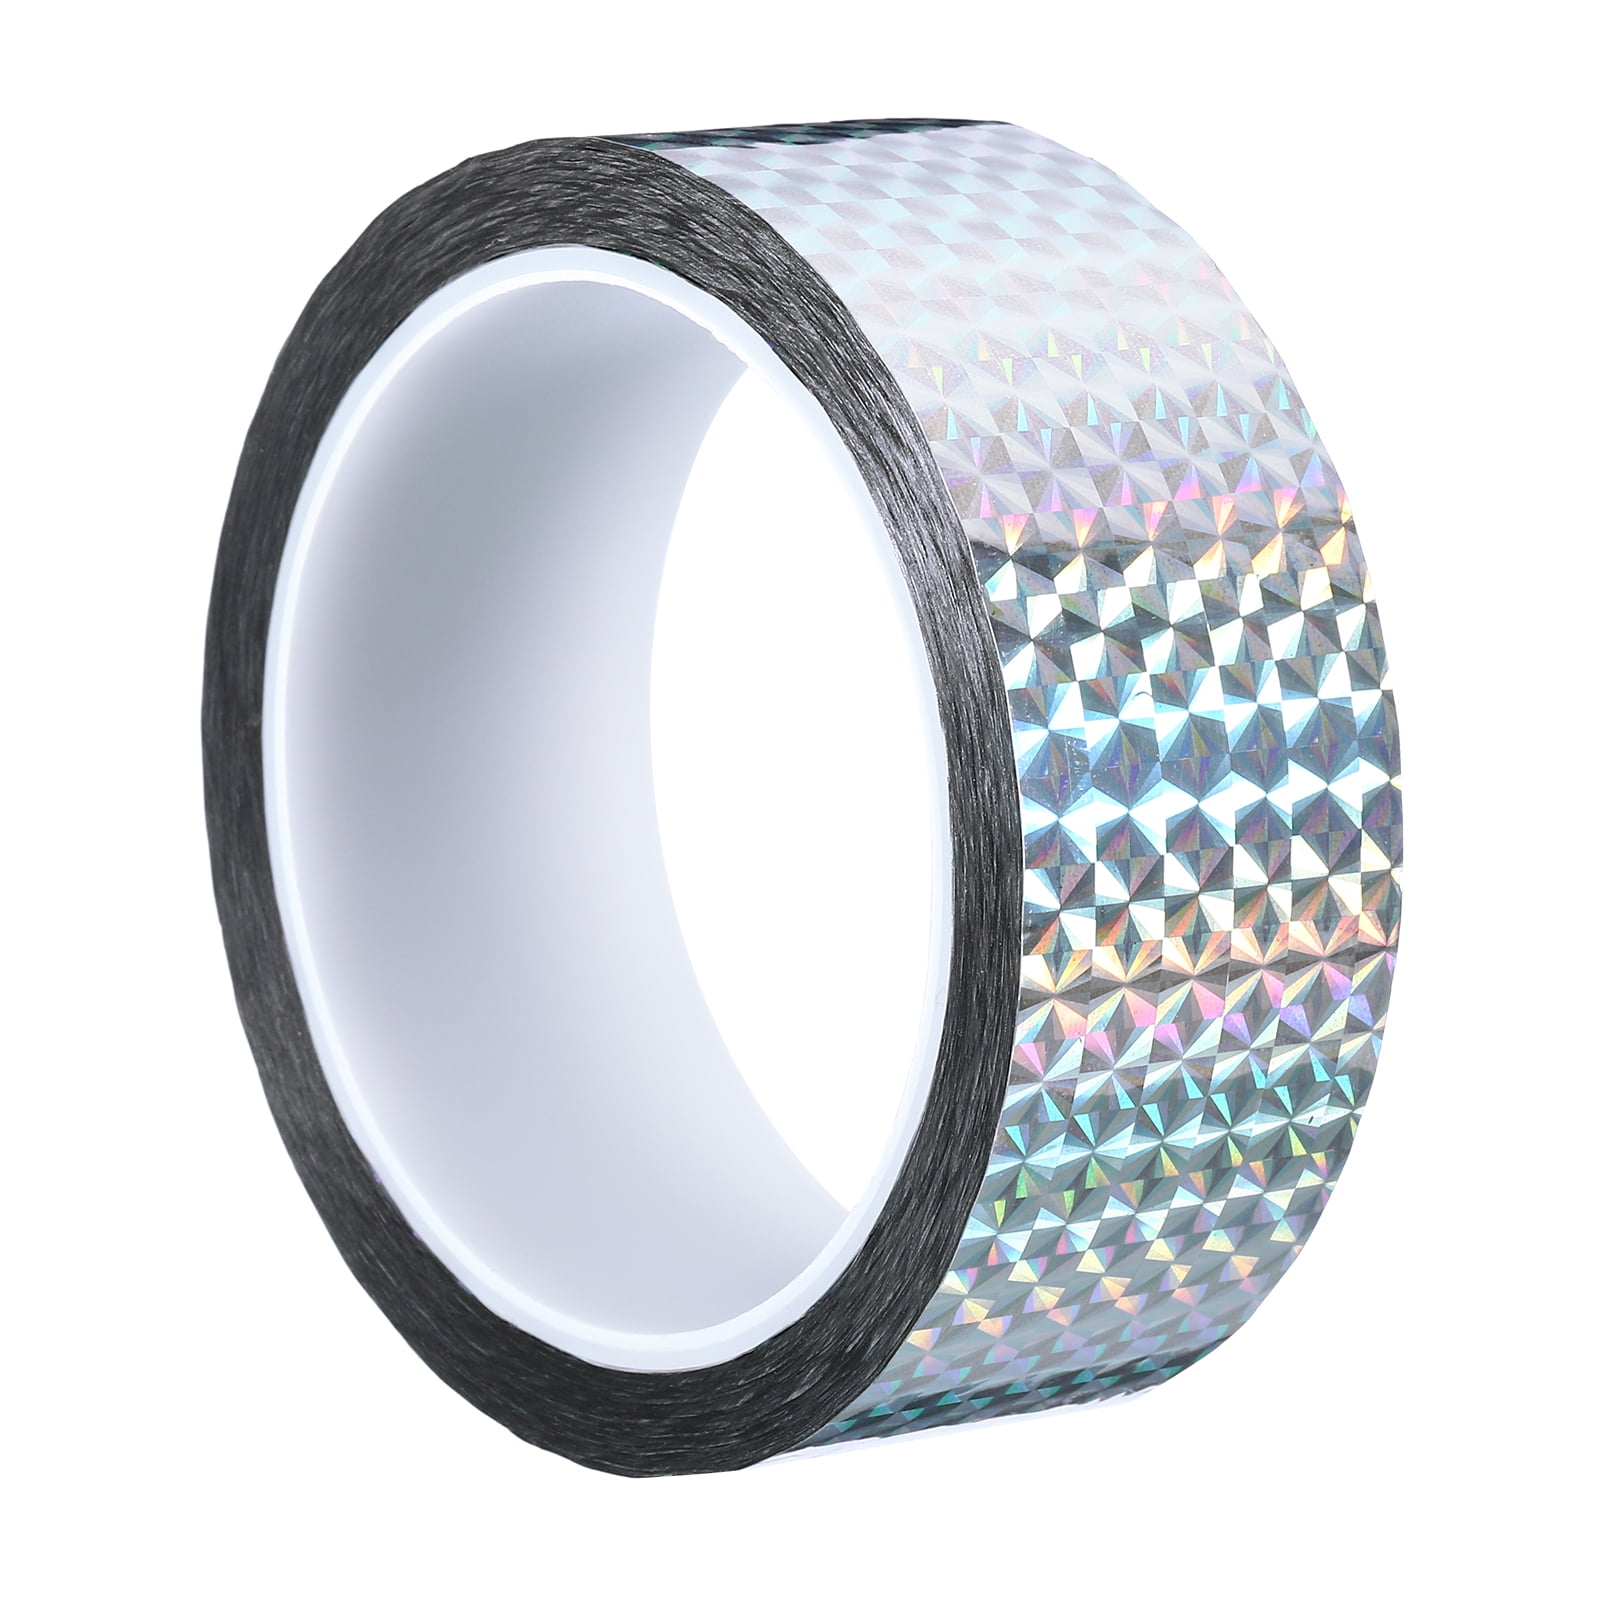 Buy Premier 5YD Holographic Tape Mix at 3.00